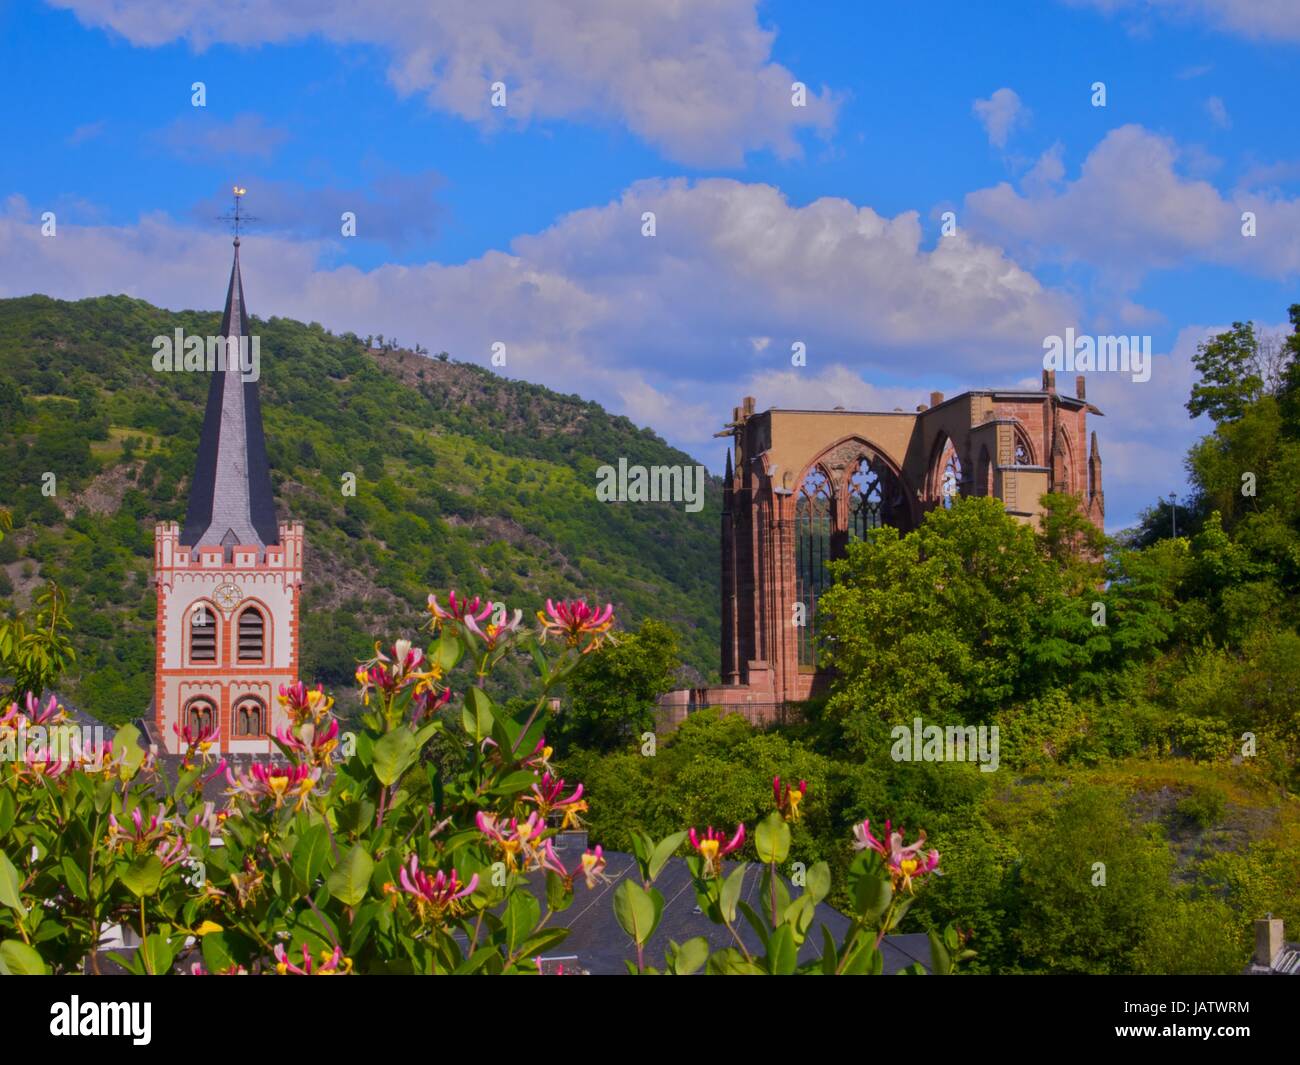 werner chapel and parish church in bacharach Stock Photo